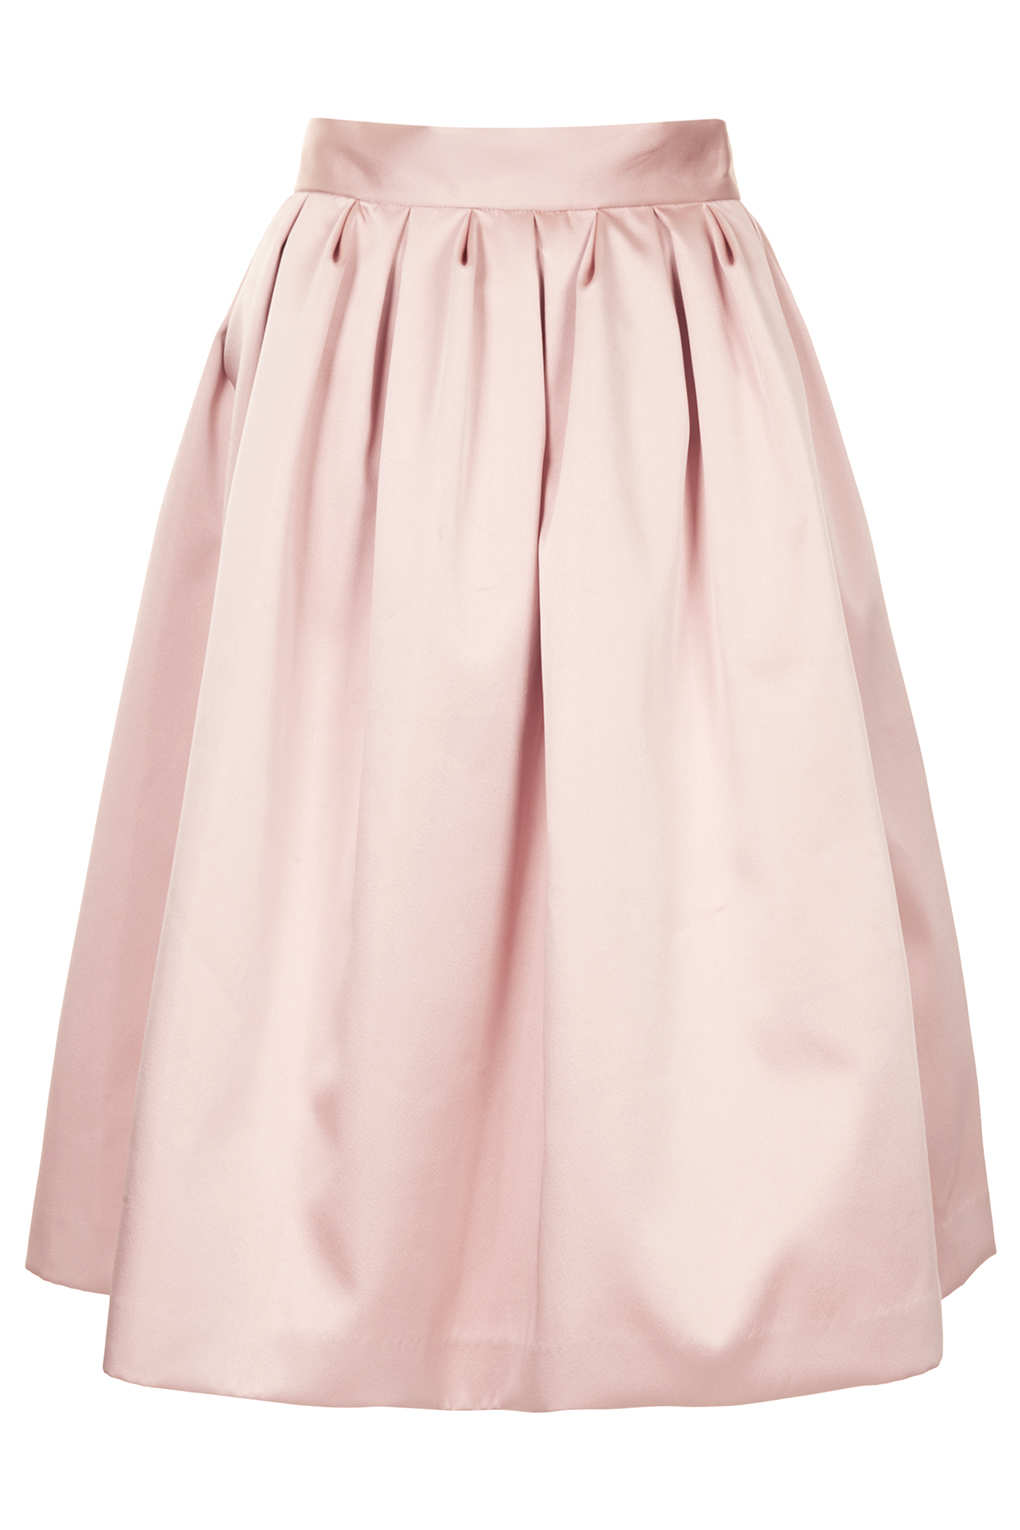 Lyst - Topshop Limited Edition Duchess Satin Midi Skirt in Natural